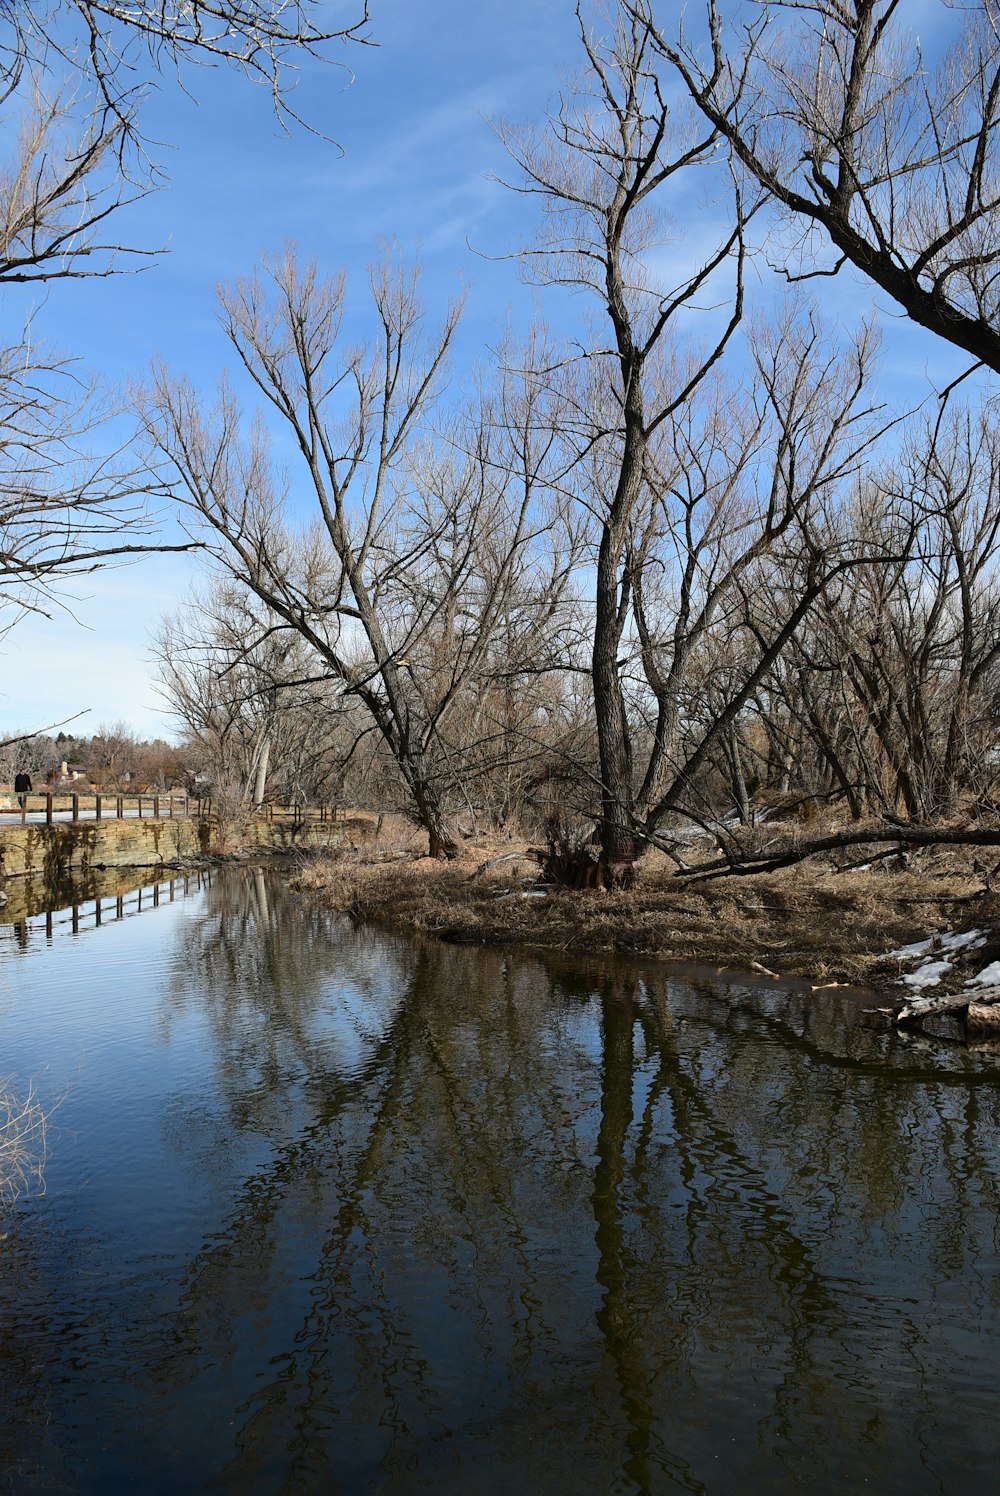 a body of water surrounded by bare trees